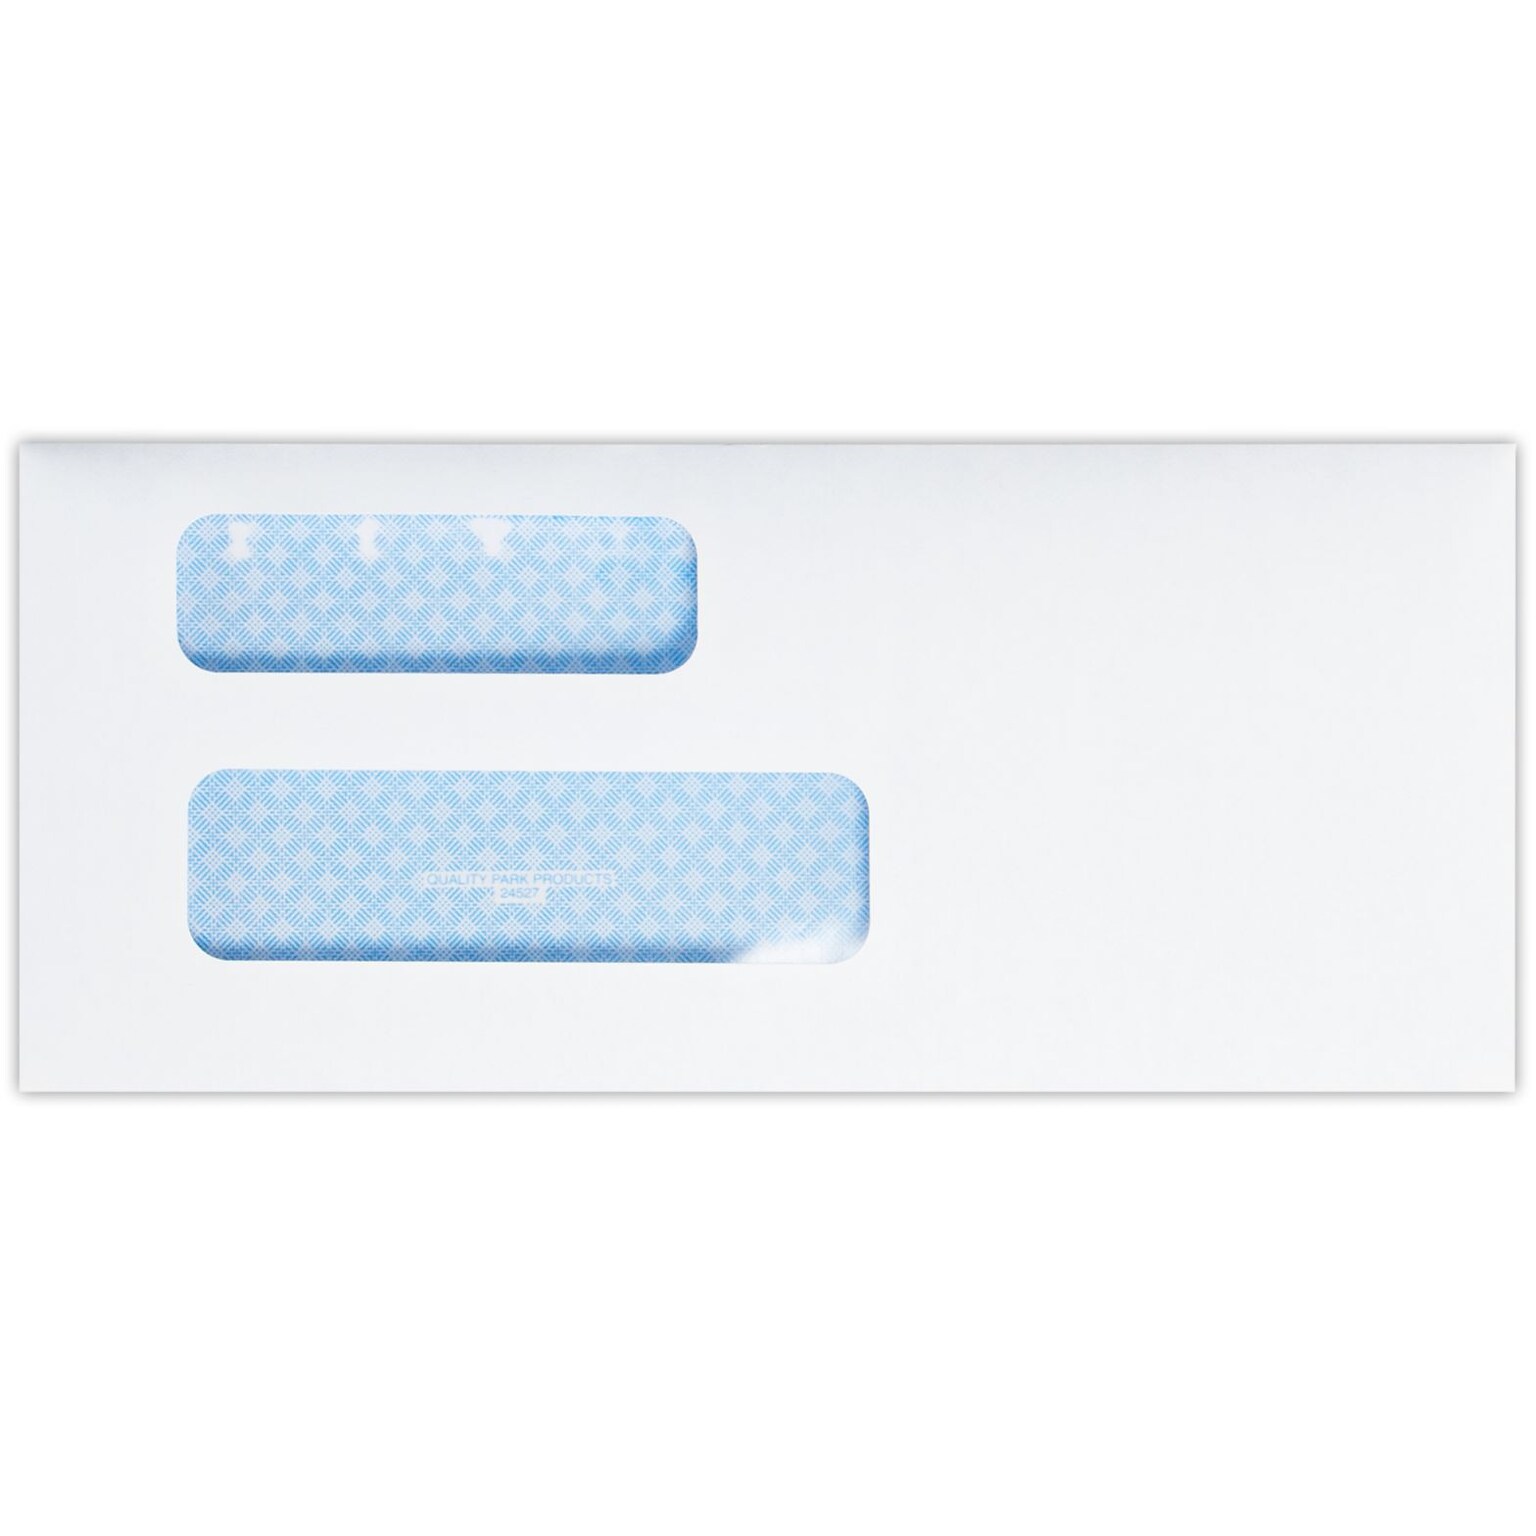 Quality Park Moistenable Glue Security Tinted #9 Double Window Envelope, 3 7/8 x 8 7/8, Bright White, 1000/Pack (9DW-W-1000)